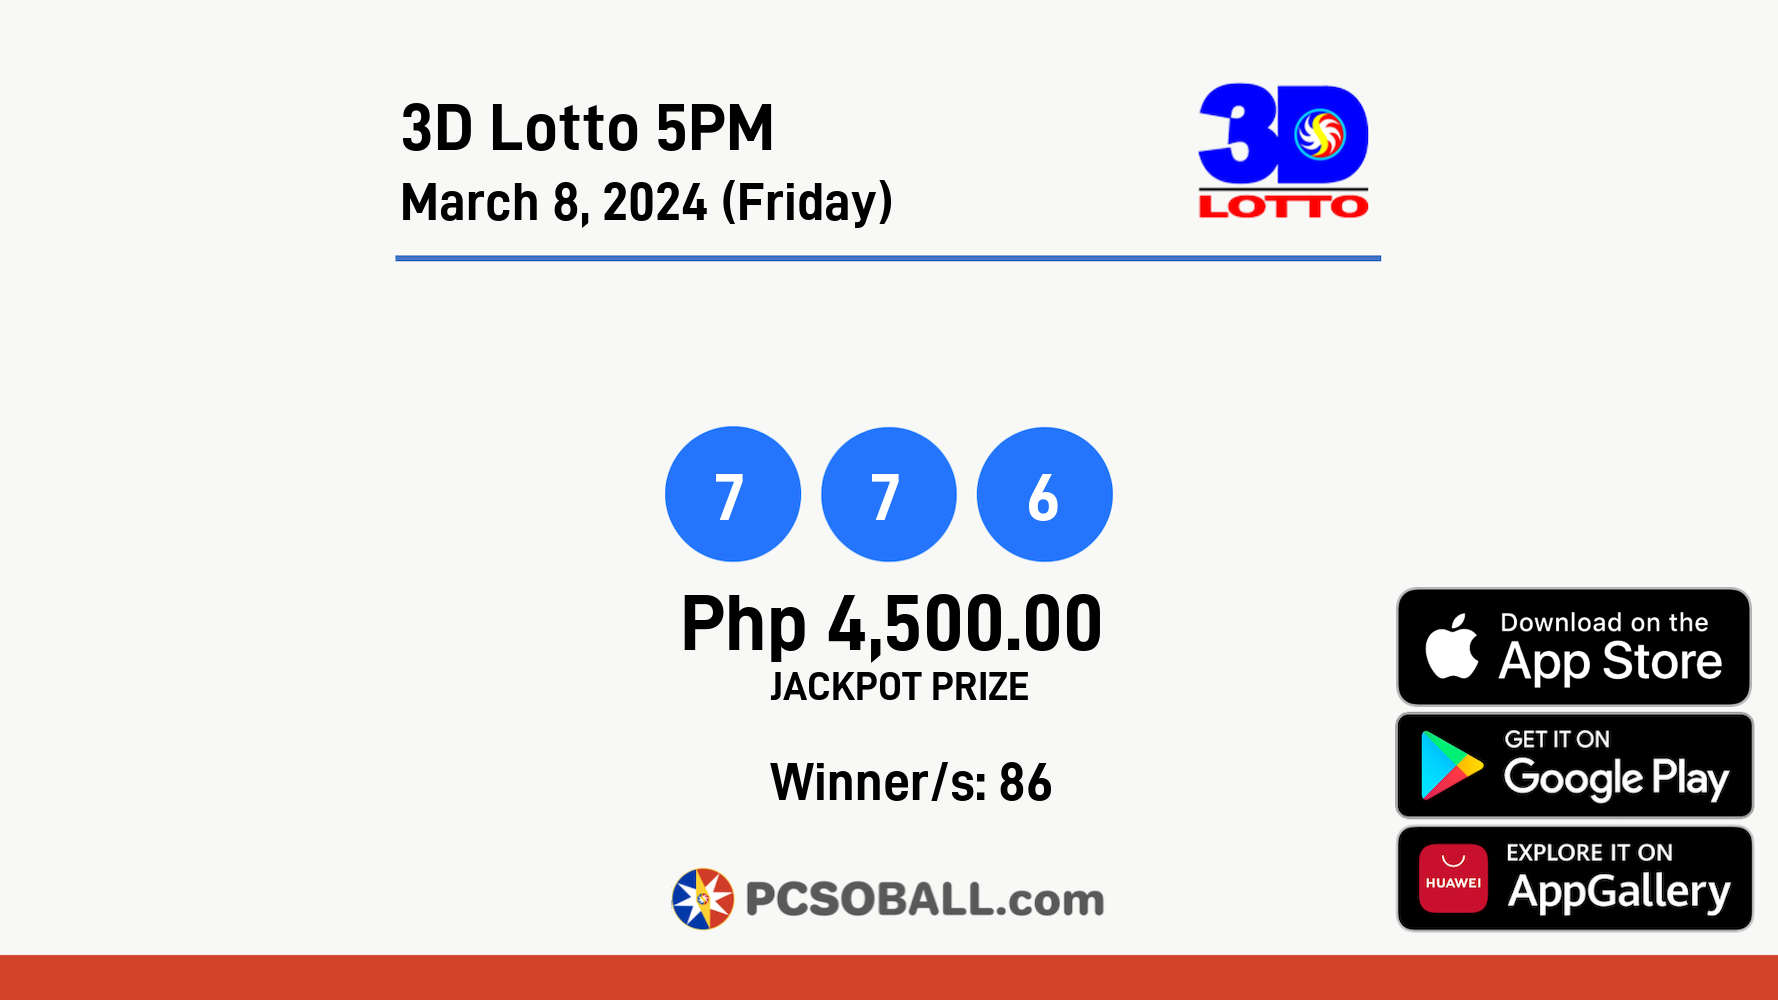 3D Lotto 5PM March 8, 2024 (Friday) Result